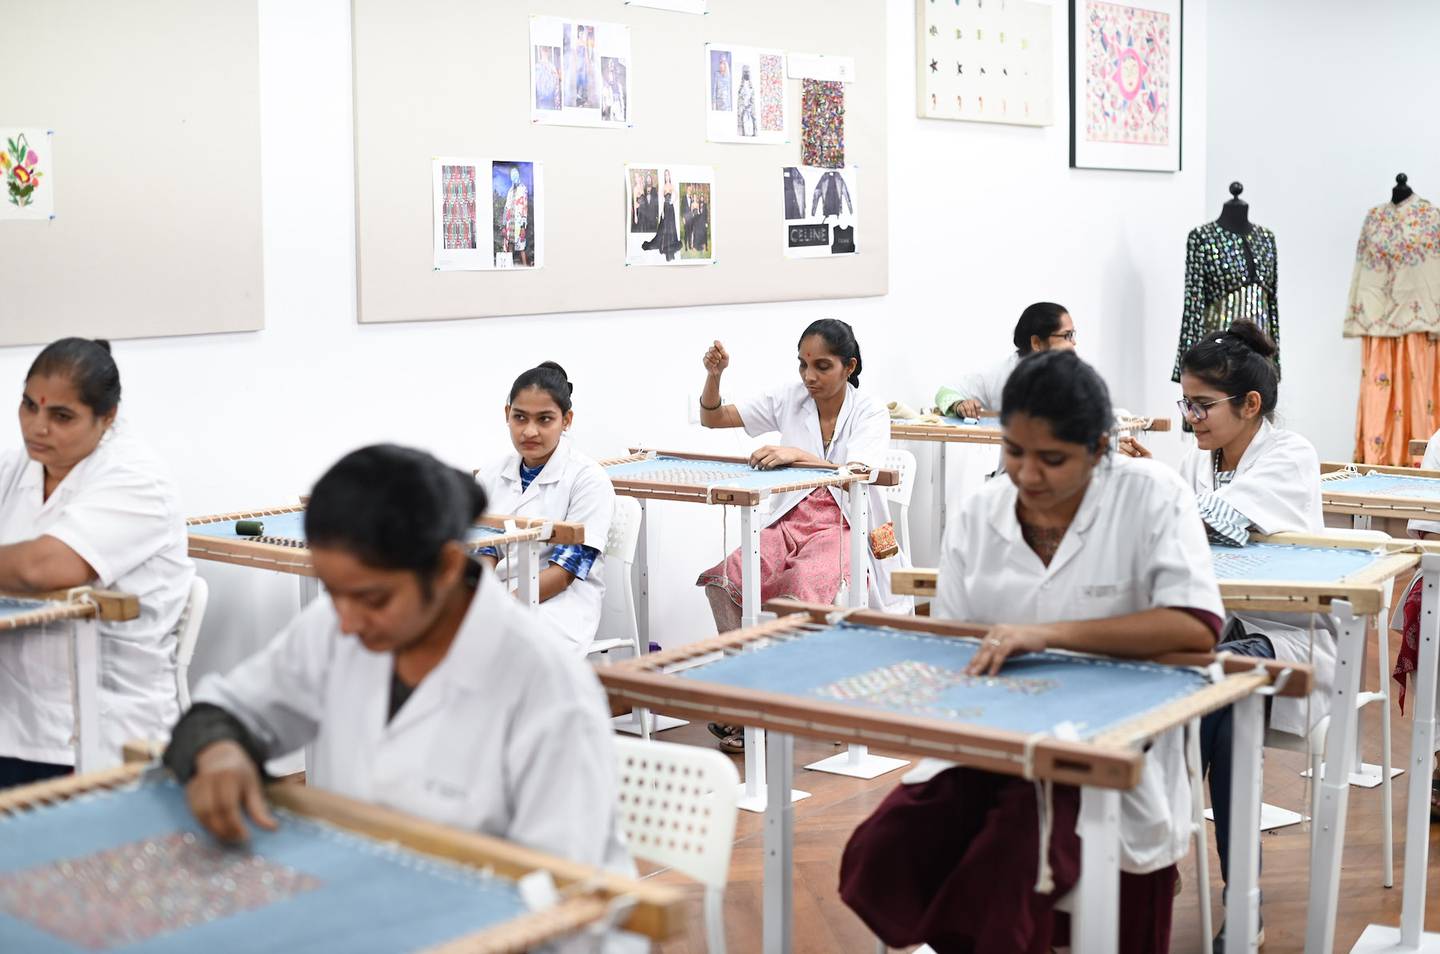 The Chanakya School of Art in Mumbai, India. Images shot for Christian Dior Couture.